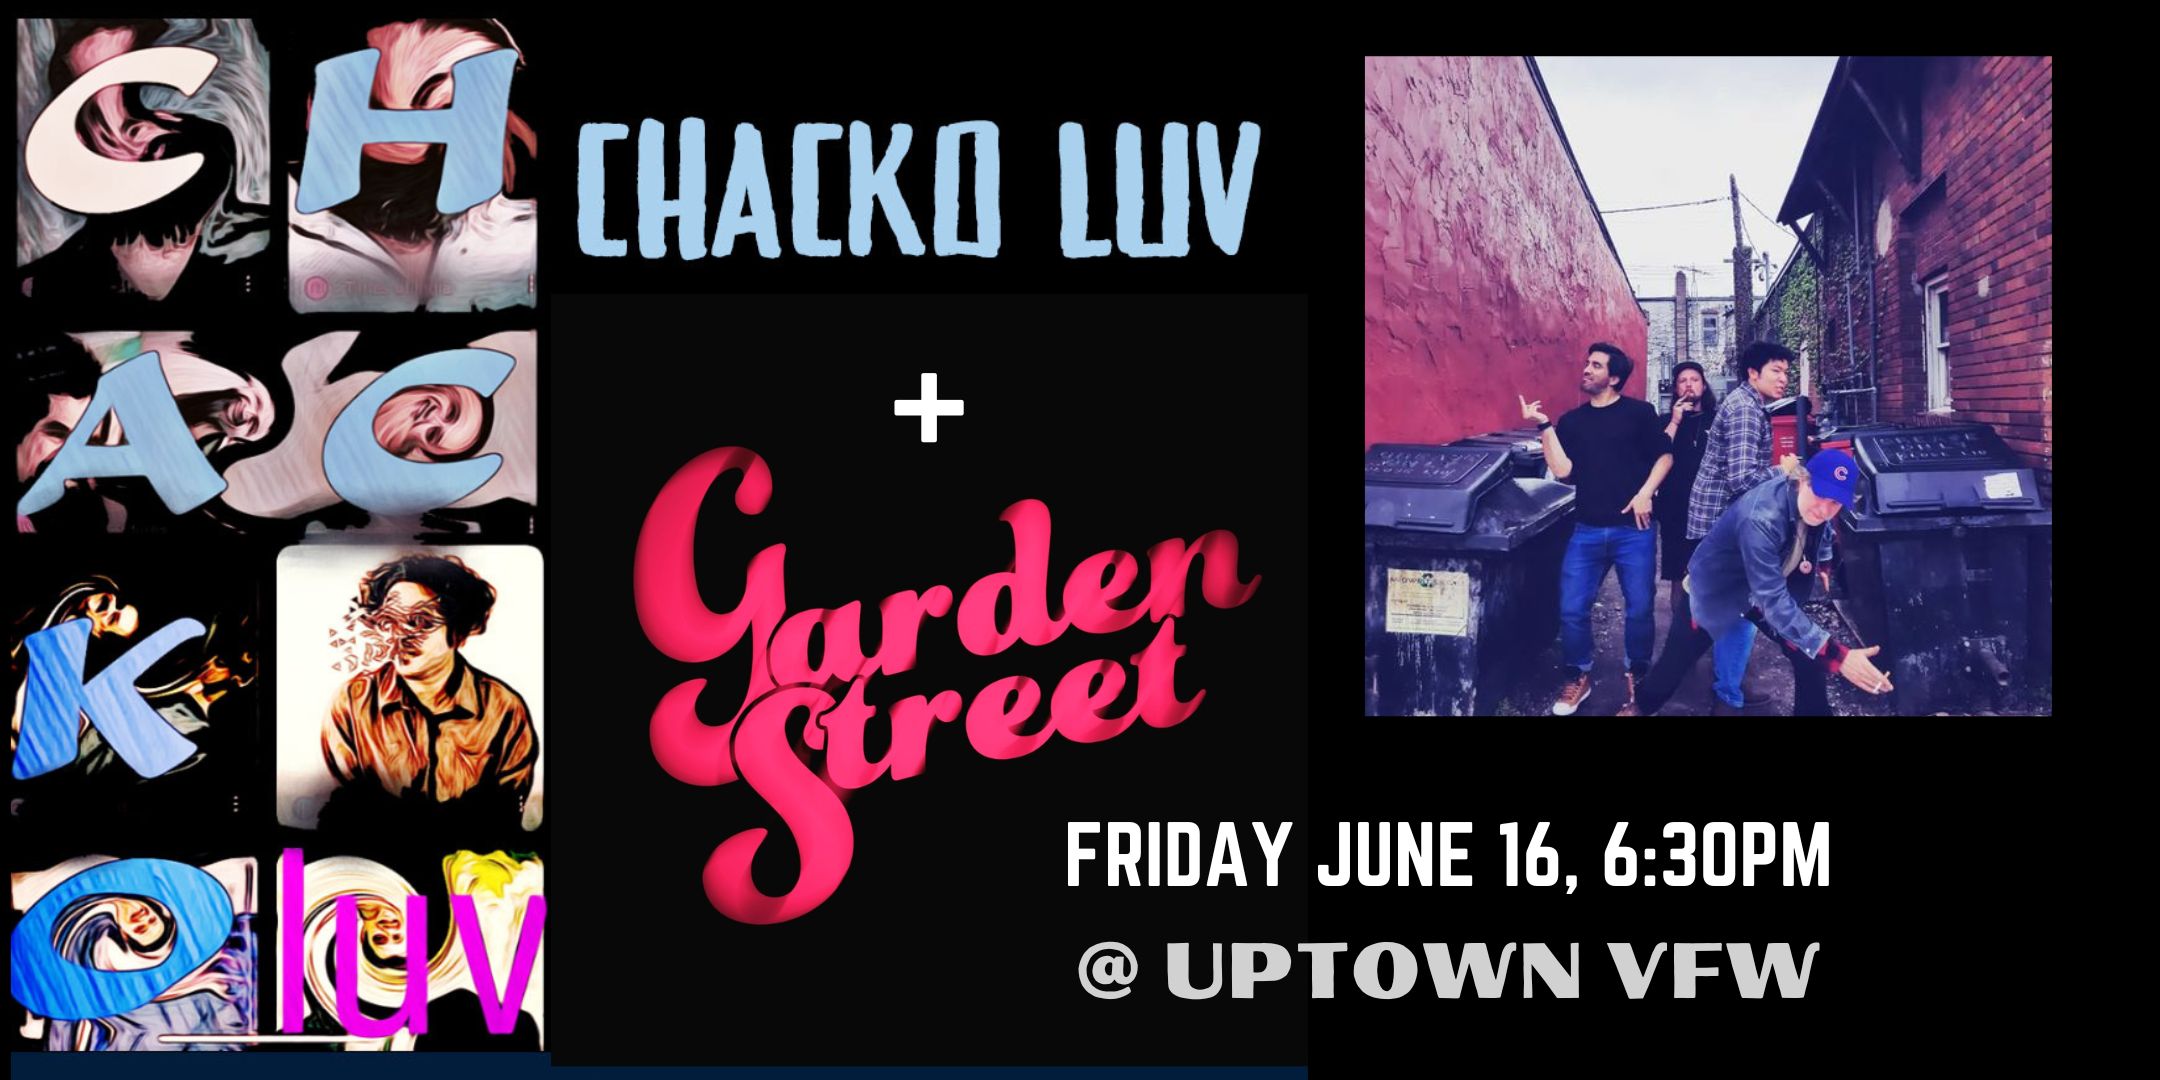 Early Show: Chacko Luv + GardenStreet Friday, June 16 James Ballentine "Uptown" VFW Post 246 Doors 7:00pm :: Music 7:30pm :: 21+ GA $5 ADV / $10 DOS NO REFUNDS